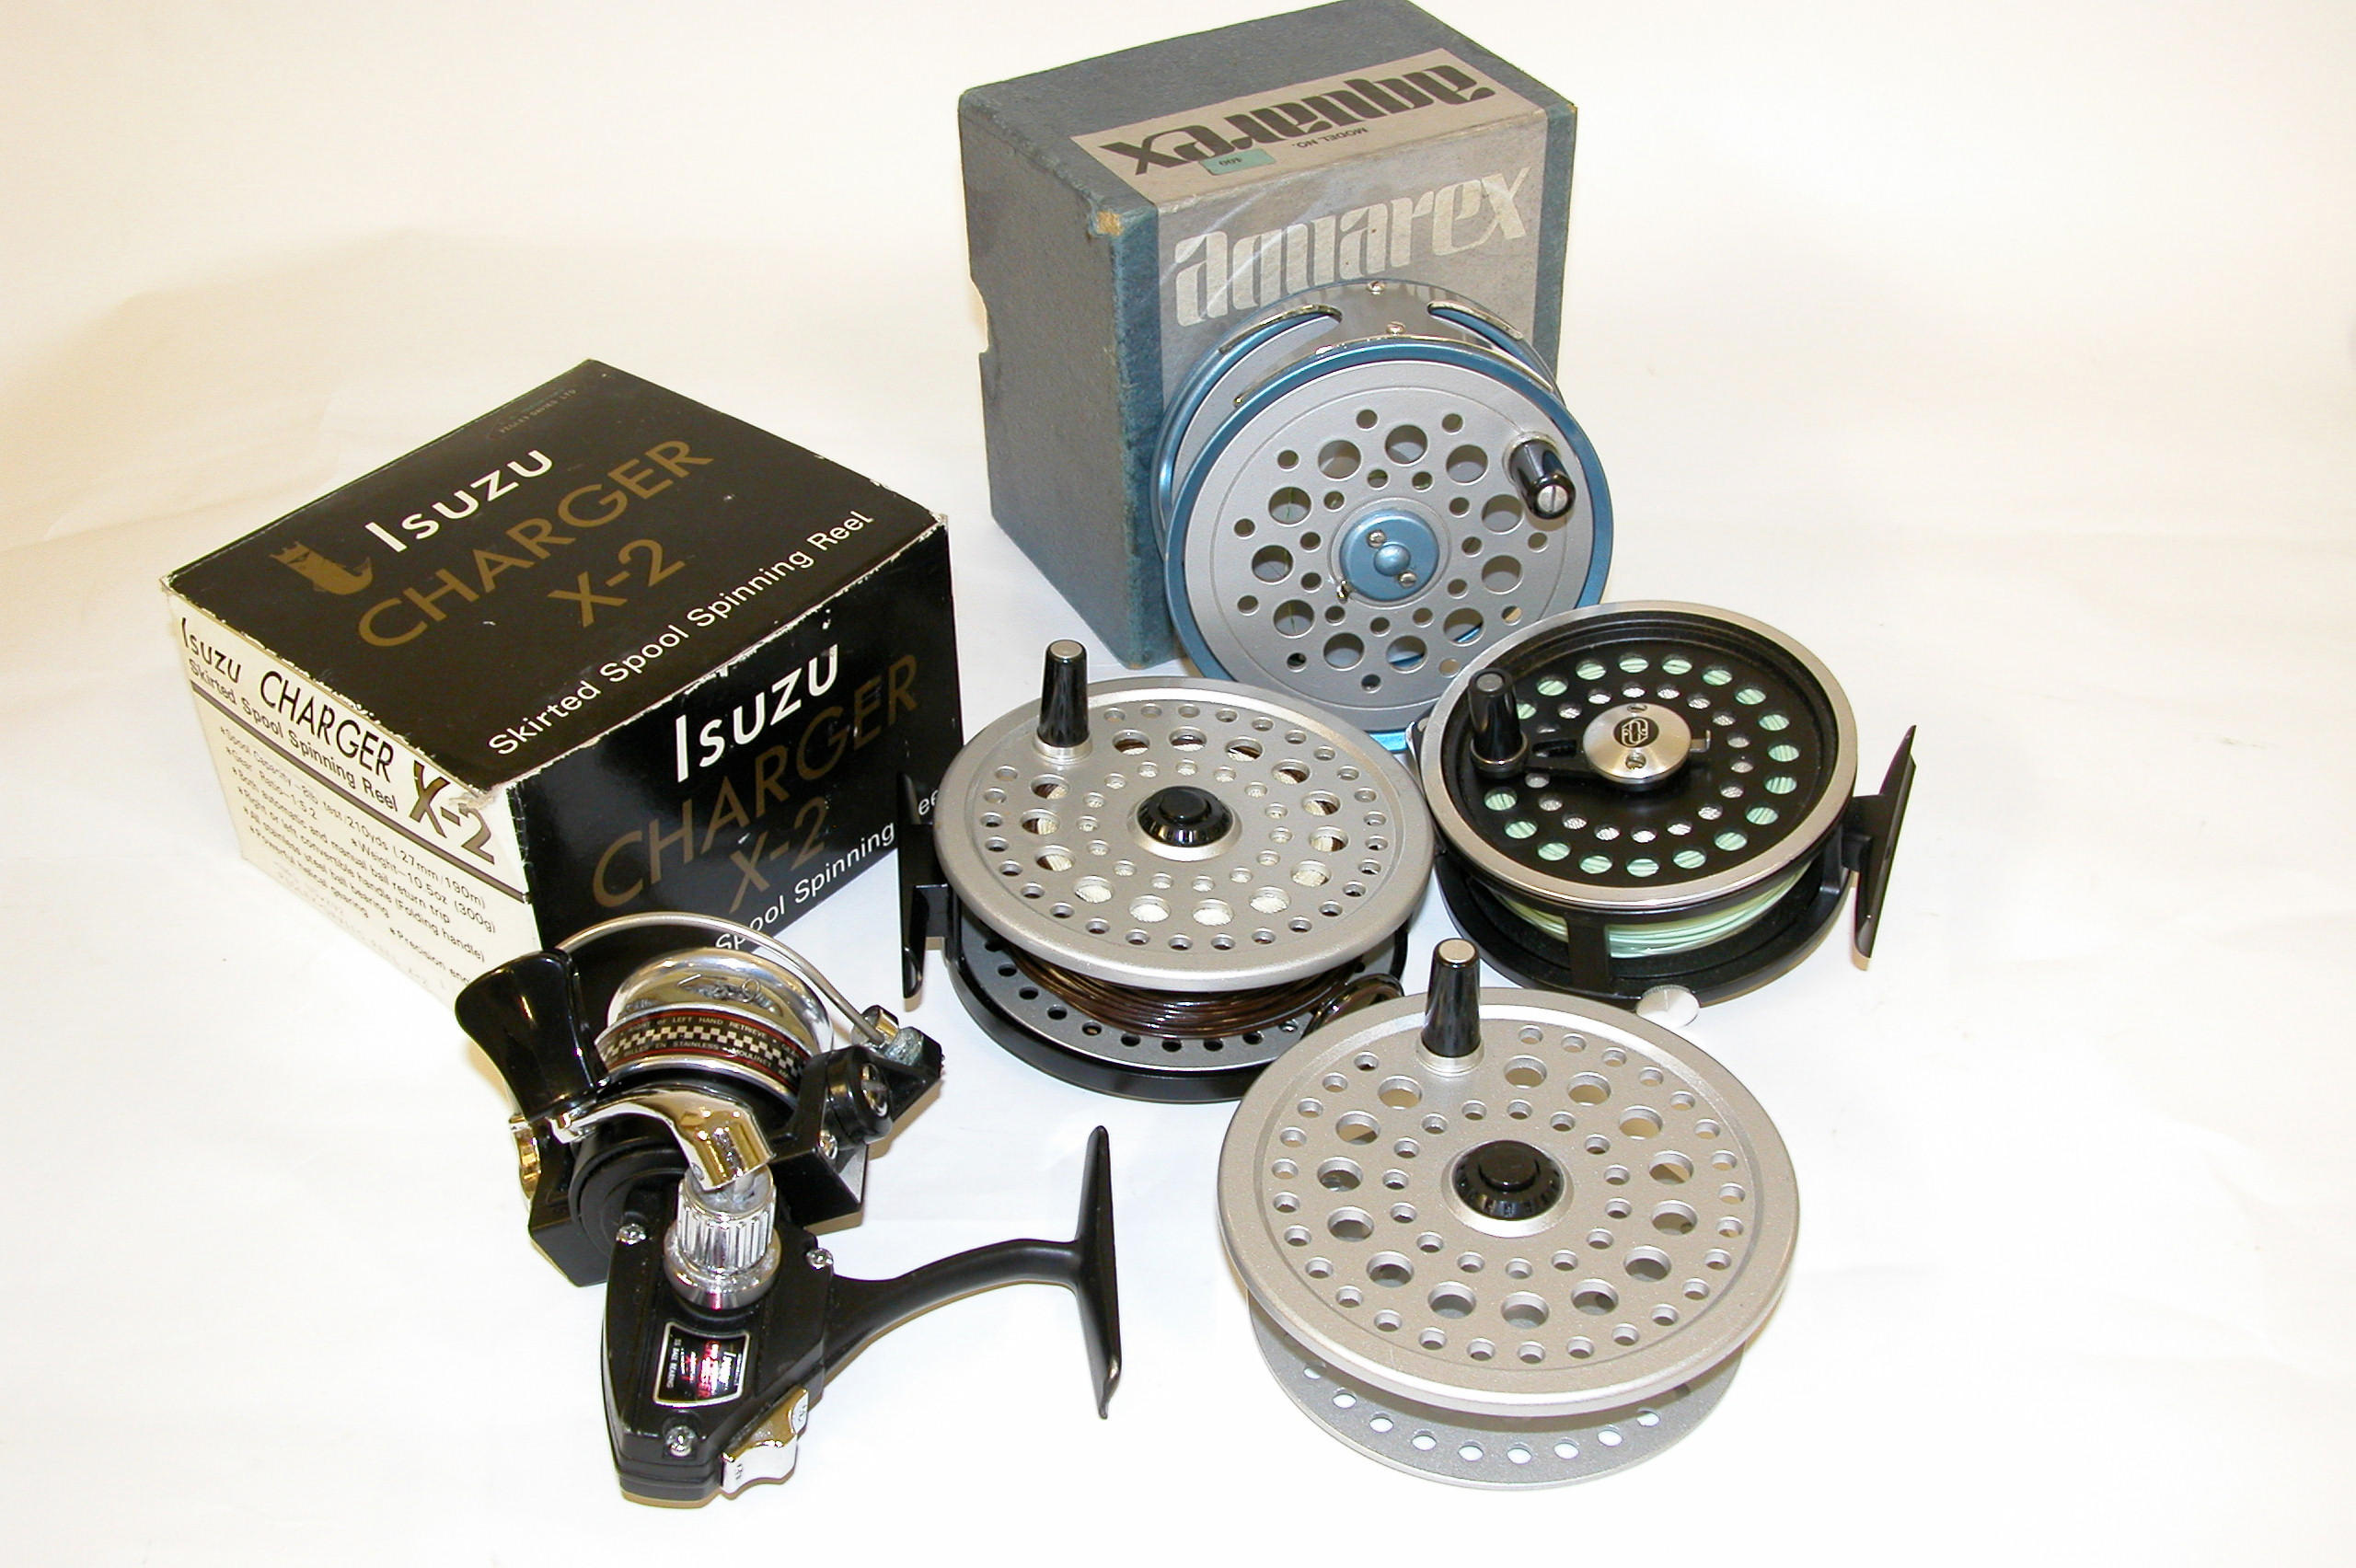 J.W.Young, The Seldex 3¾ Reel